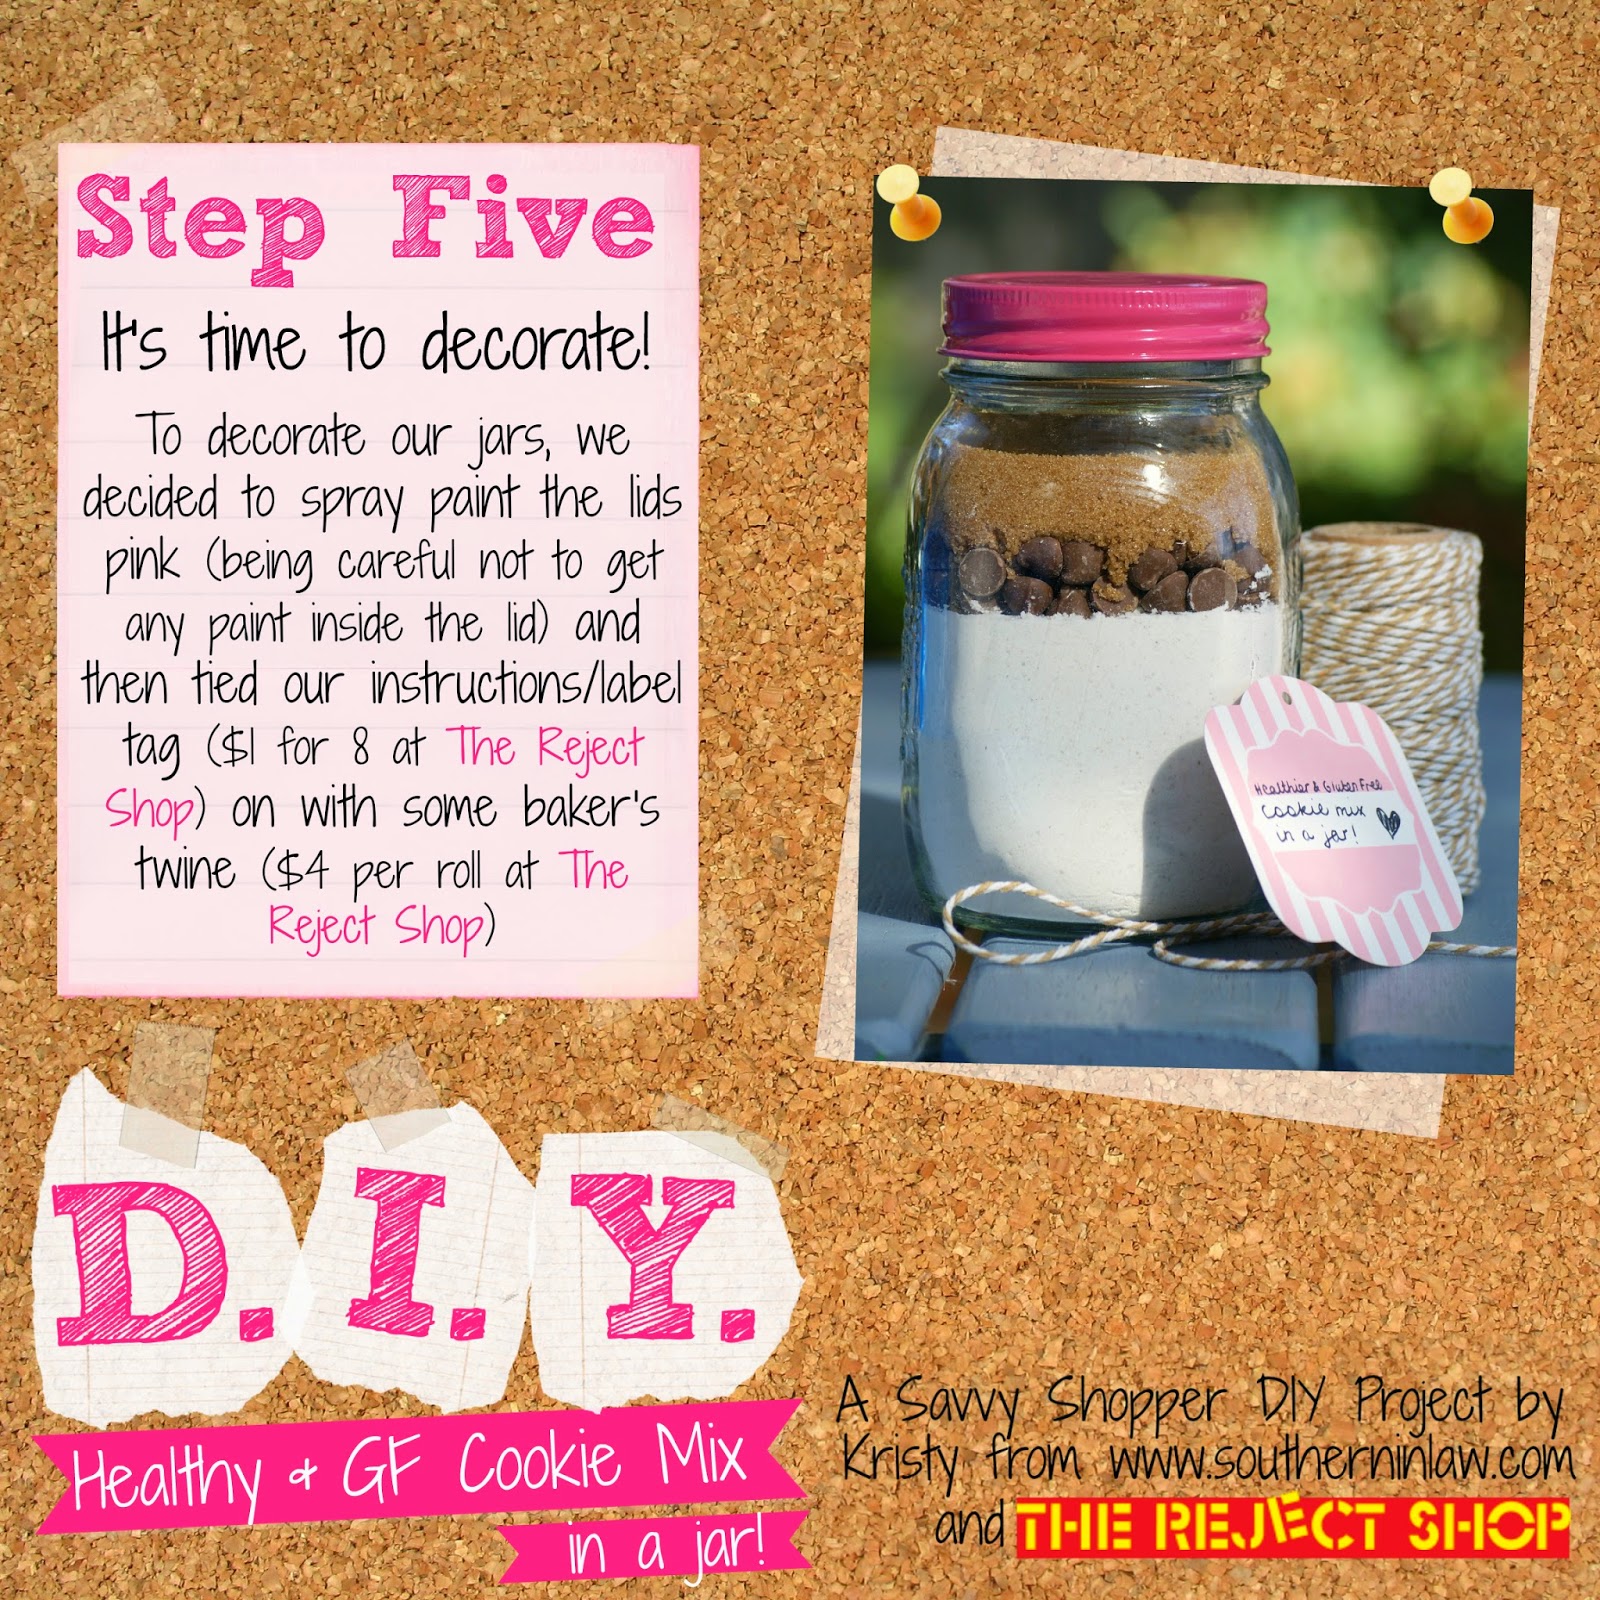 Gluten Free Cookie Mix in A Jar Recipe - Healthy Gift Ideas for Birthdays and Christmas - Gifts in a Jar on a Budget